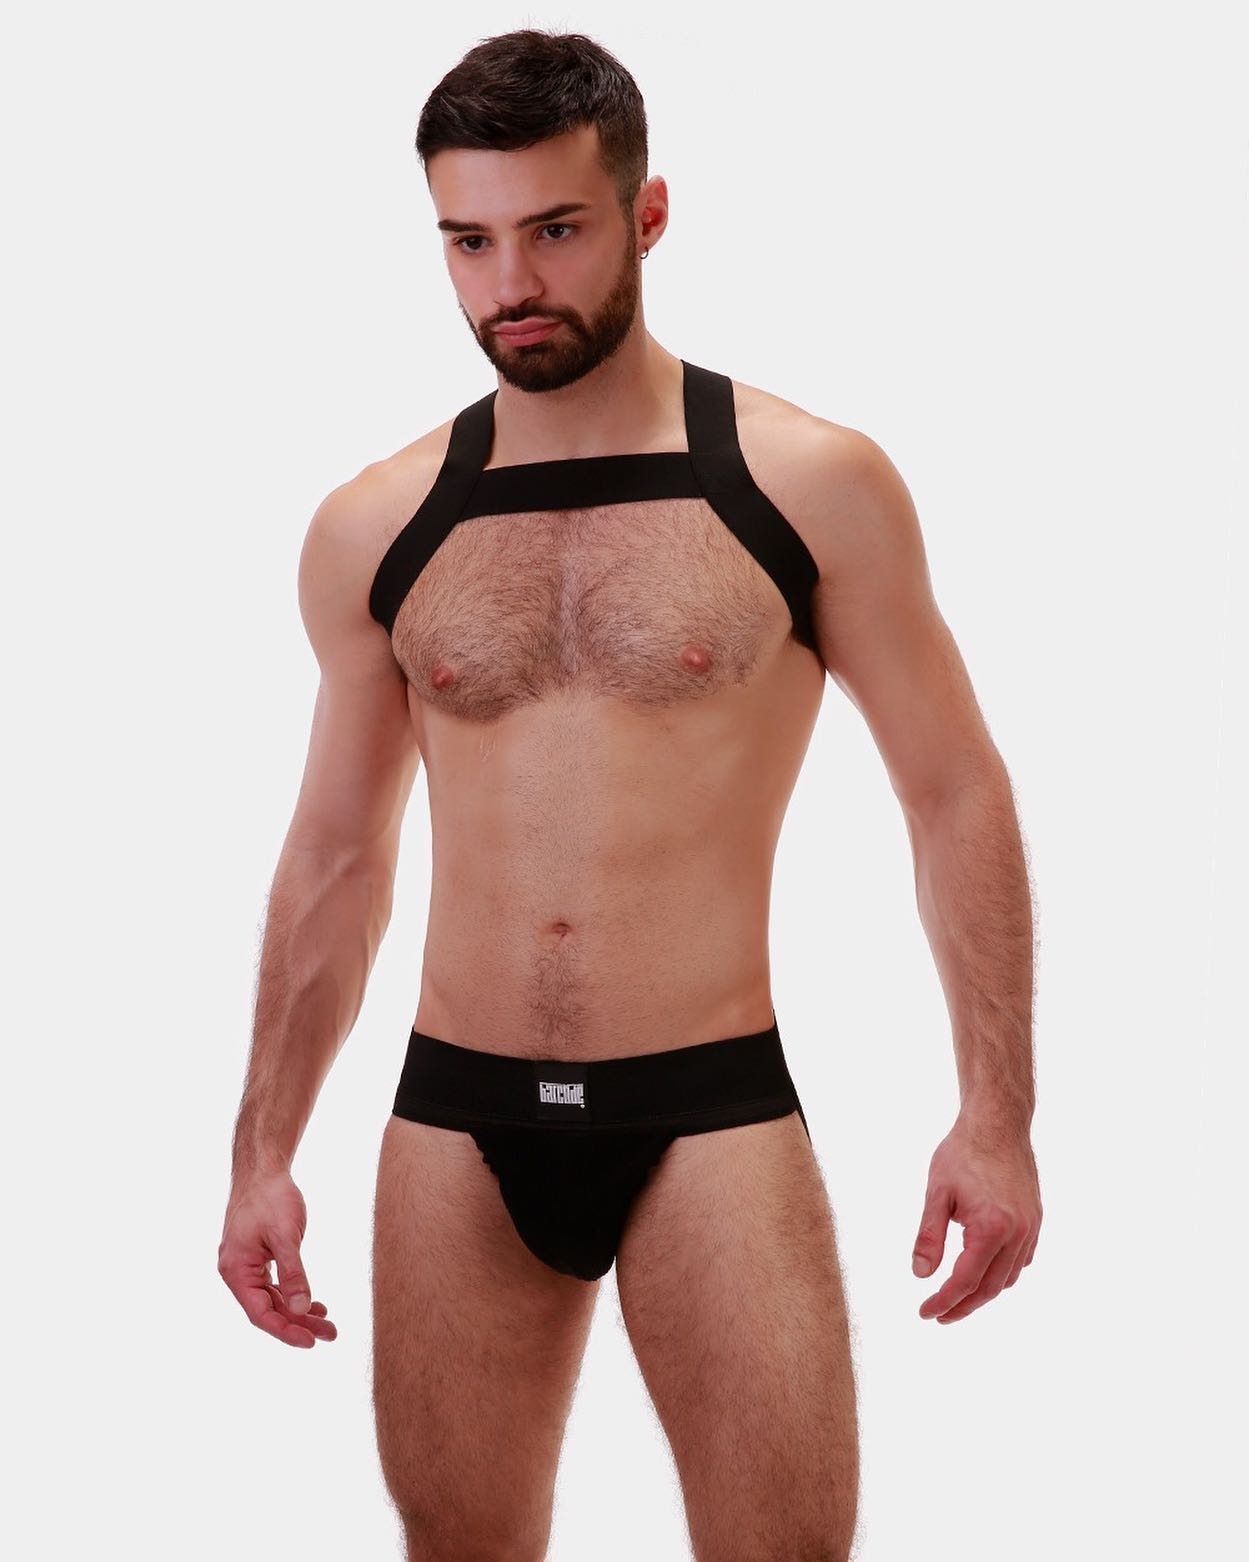 A classic style never goes out of fashion. Sergey Jockstrap in black by Barcode, a jock every fan of good underwear should have:
____
menandunderwear.com/shop